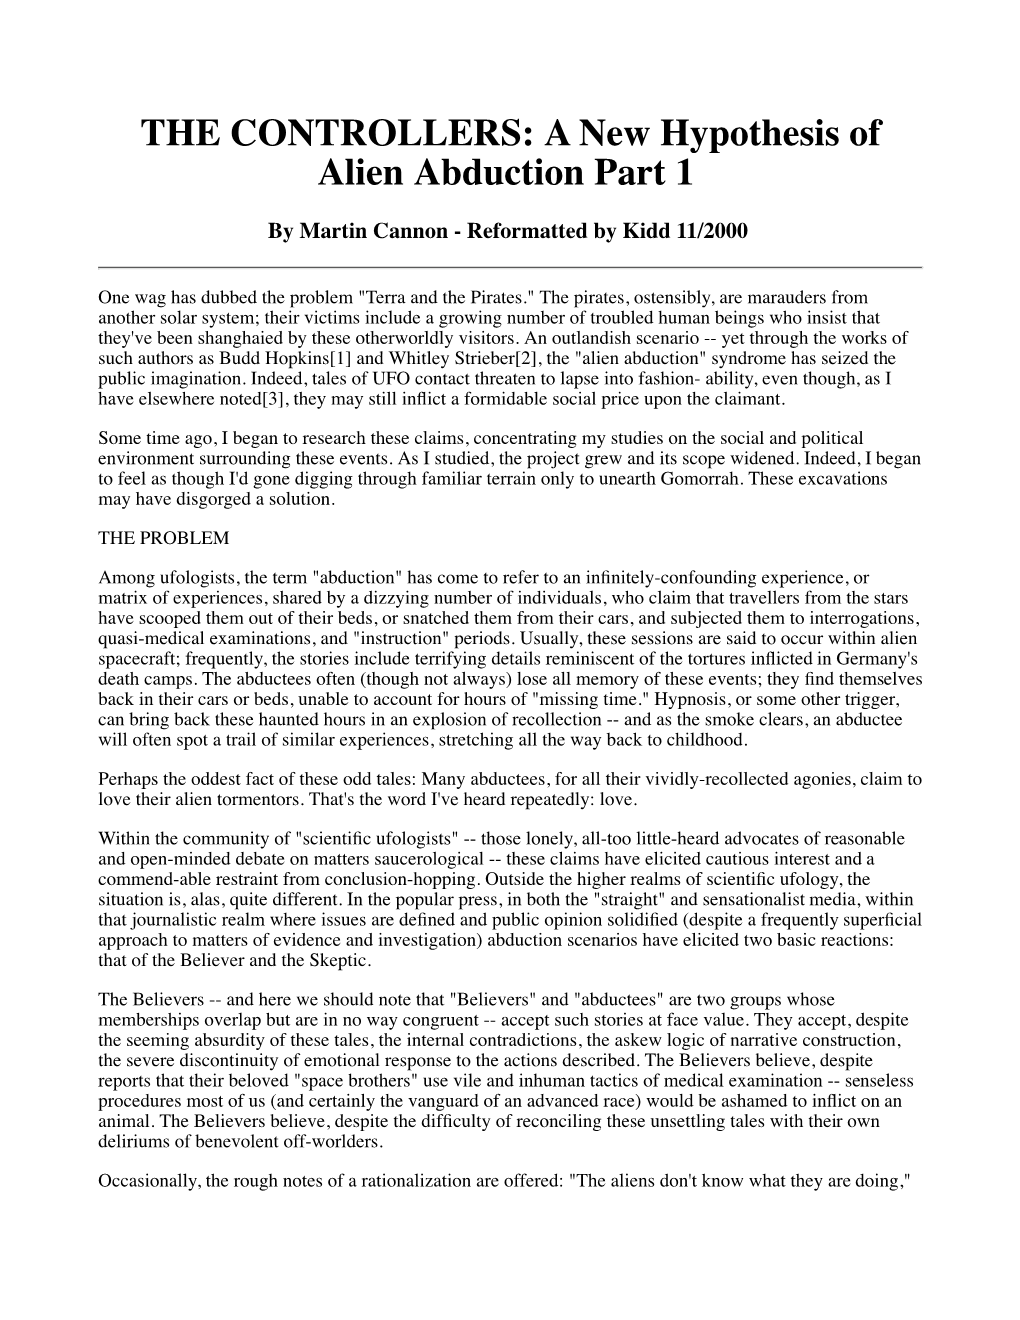 THE CONTROLLERS: a New Hypothesis of Alien Abduction Part 1